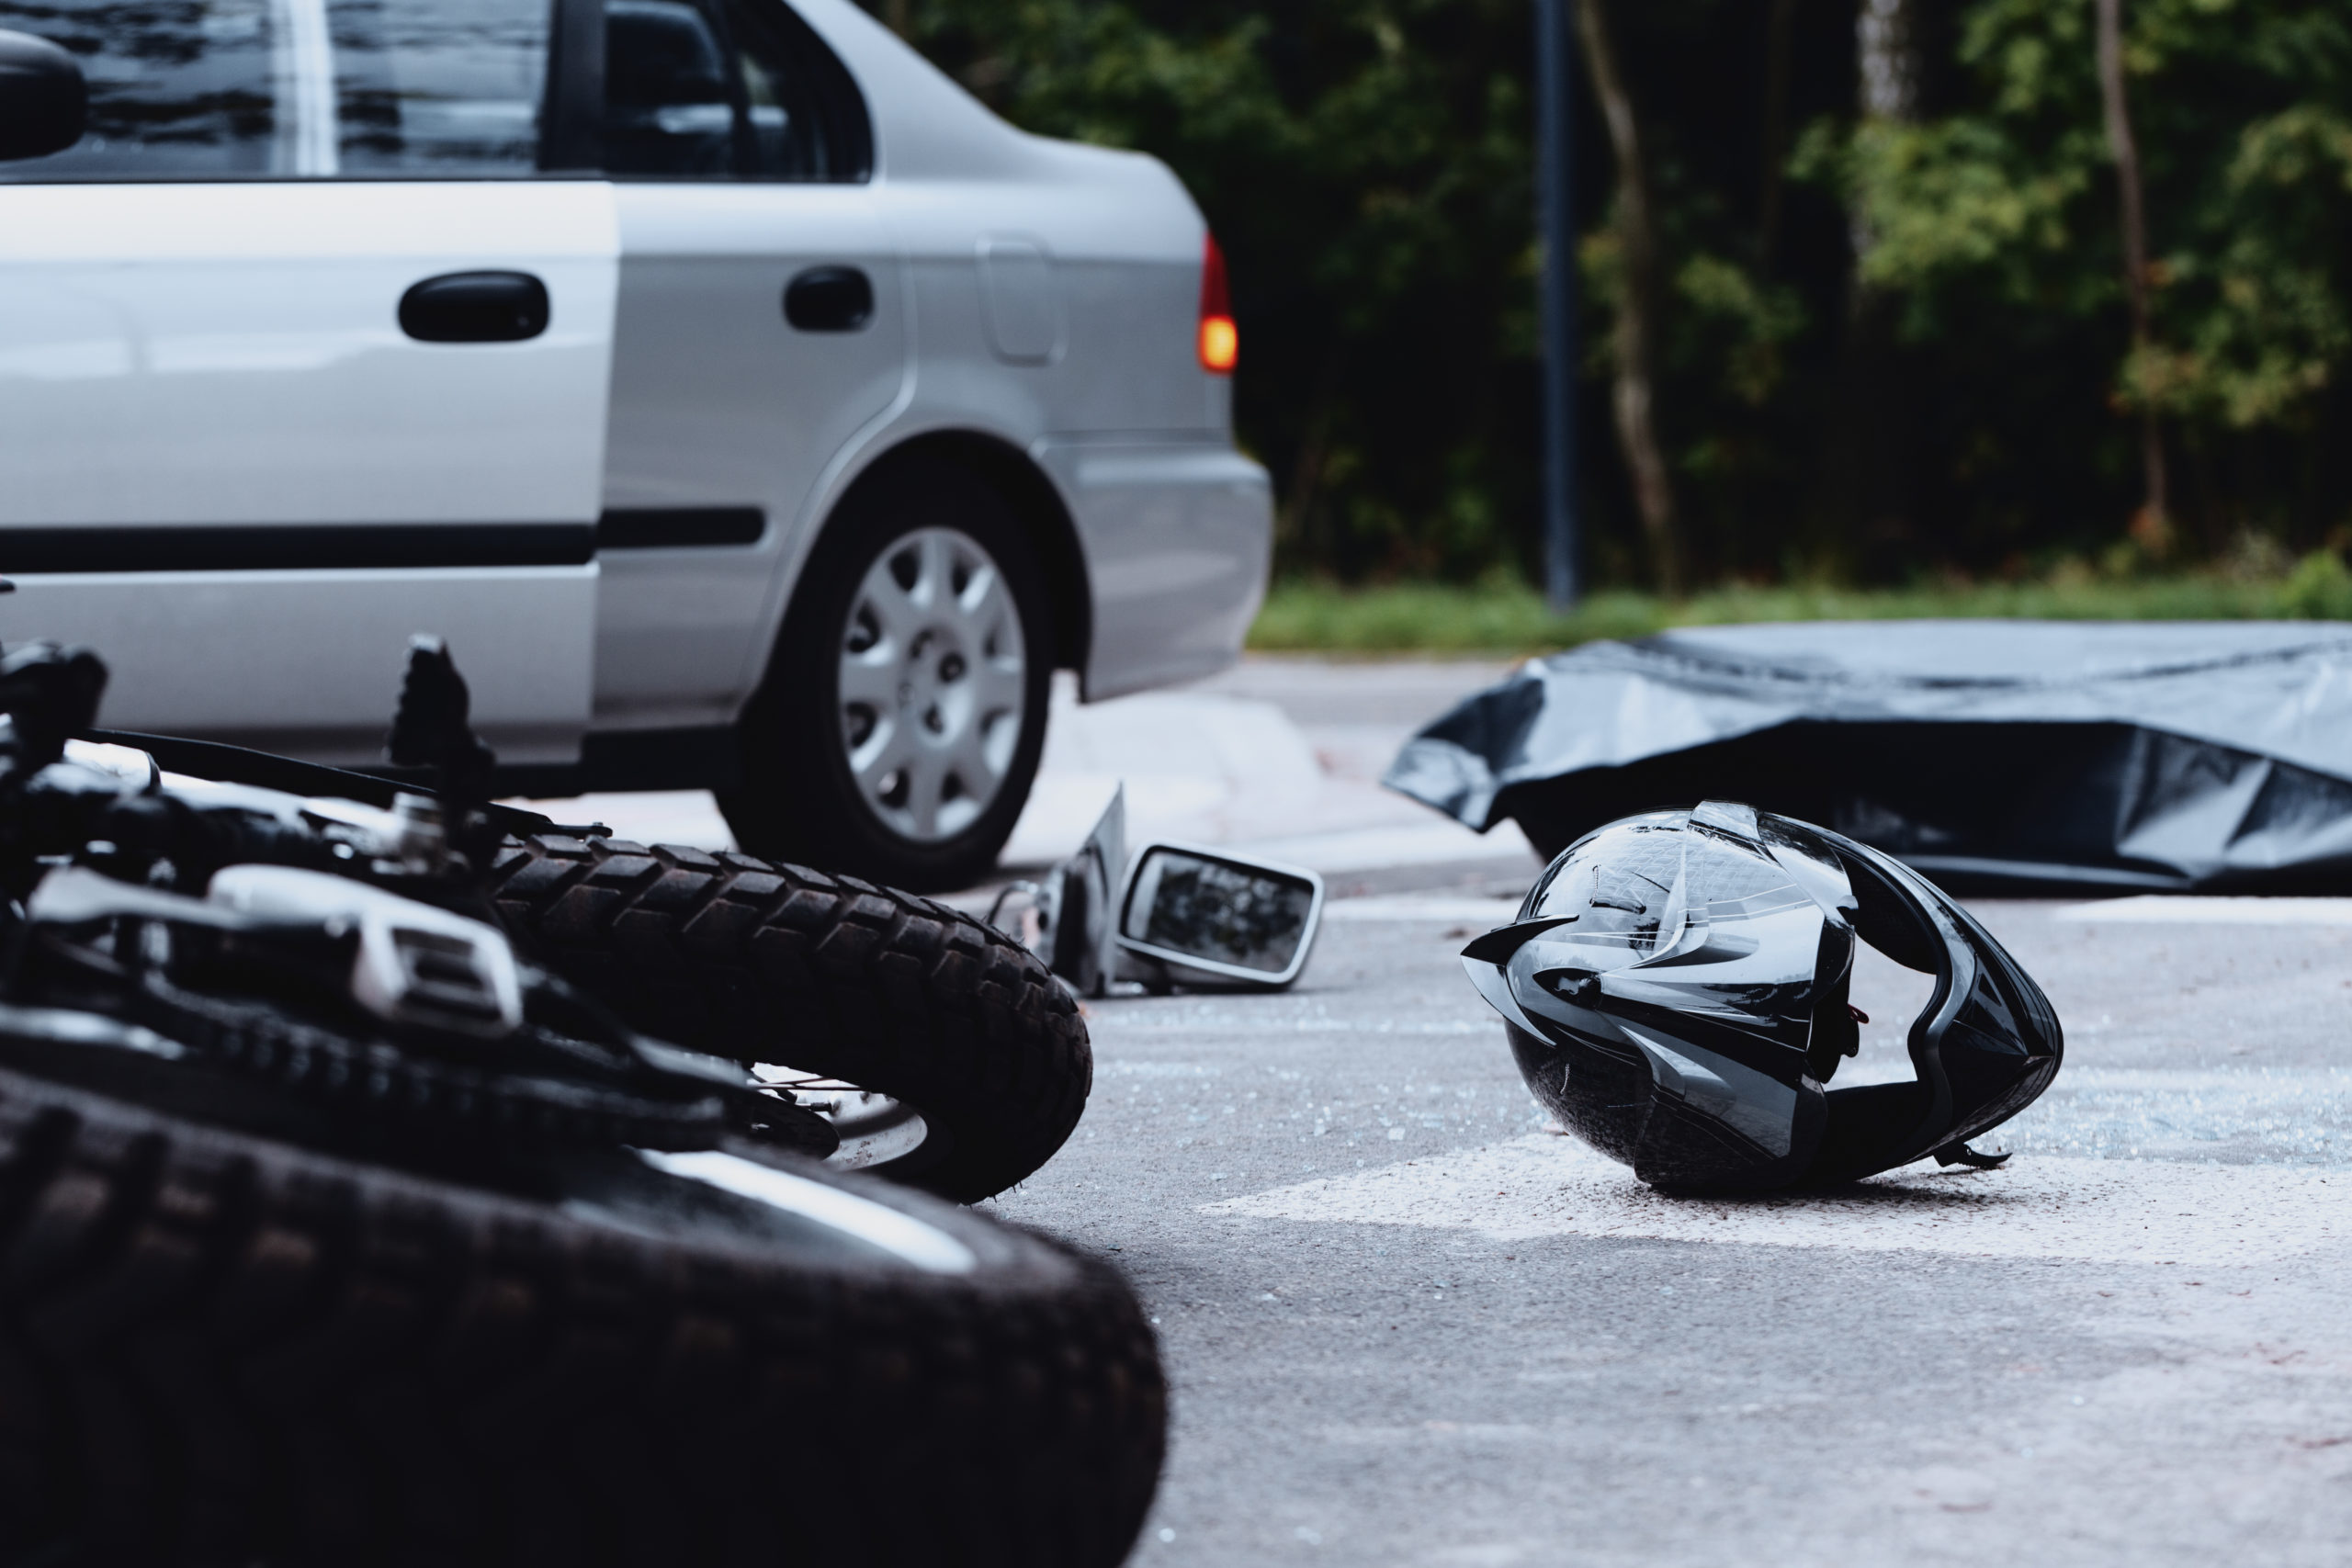 Injuries suffered in road accidents